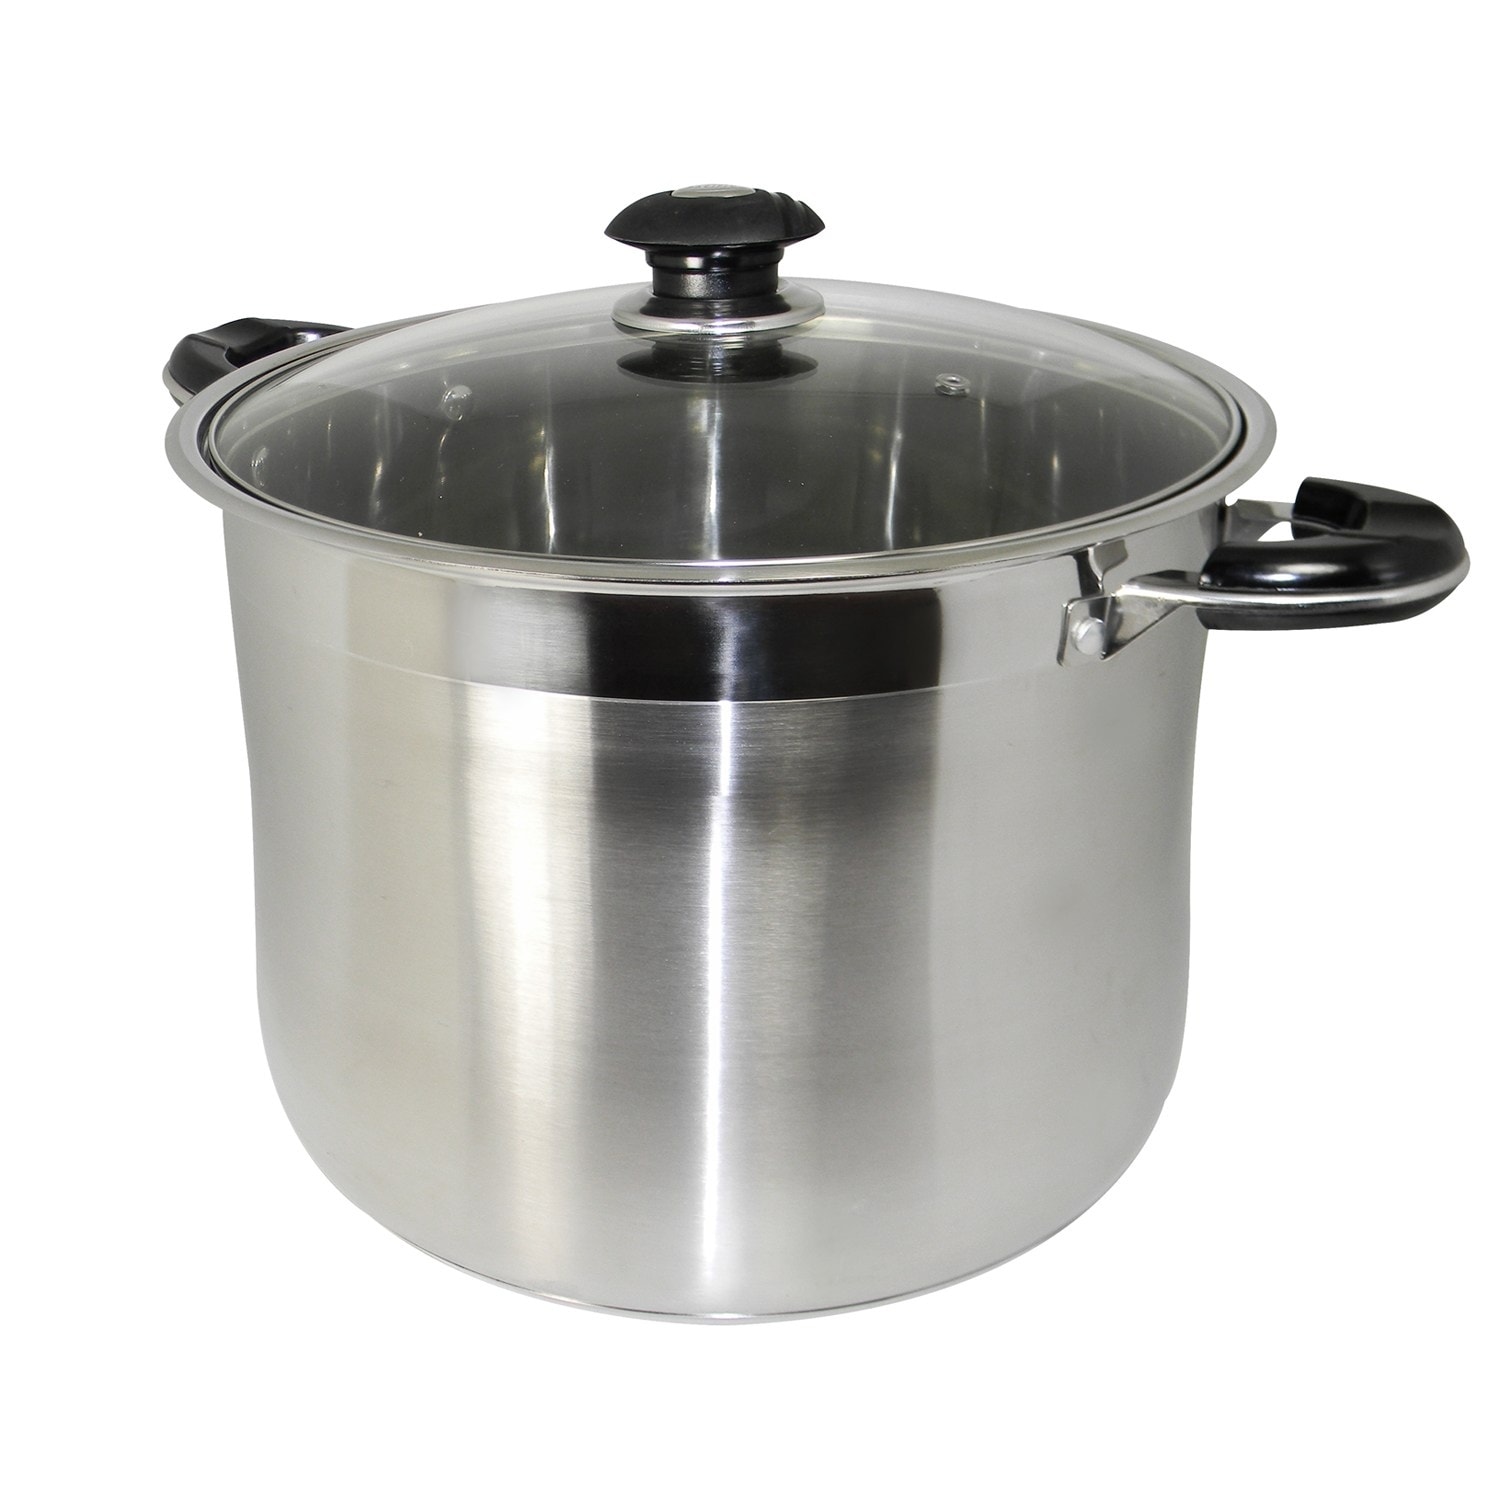 https://ak1.ostkcdn.com/images/products/is/images/direct/234e73b92d4f6e0d50a6f2ed9d7f4b0a0cc4cc71/20-Qt-Stainless-Steel-Tri-Ply-Clad-Heavy-Duty-Gourmet-Stock-Pot.jpg